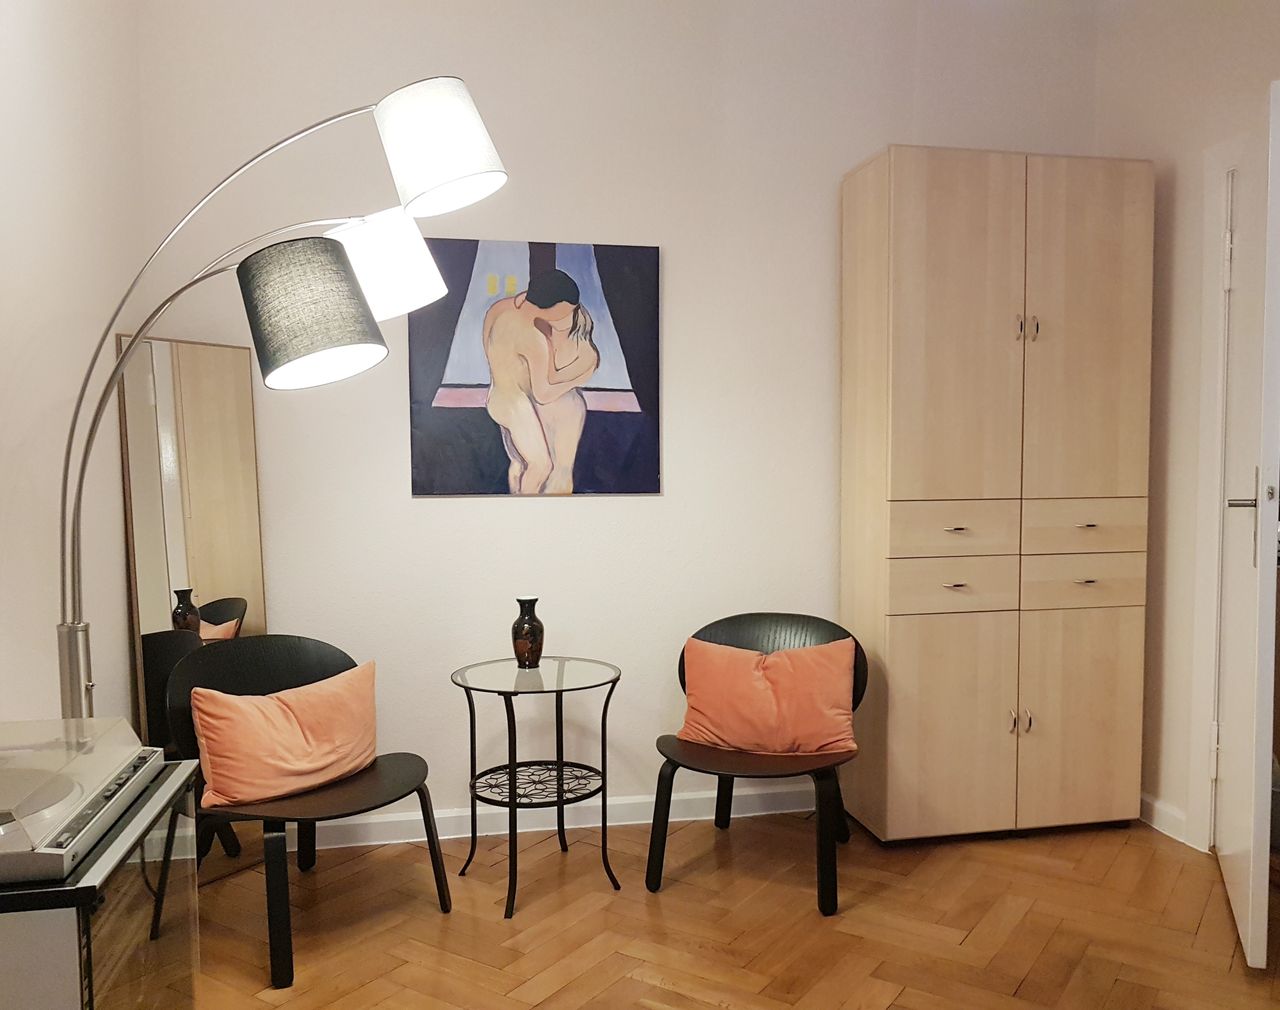 Cosy apartment with balcony and good connection to public transport